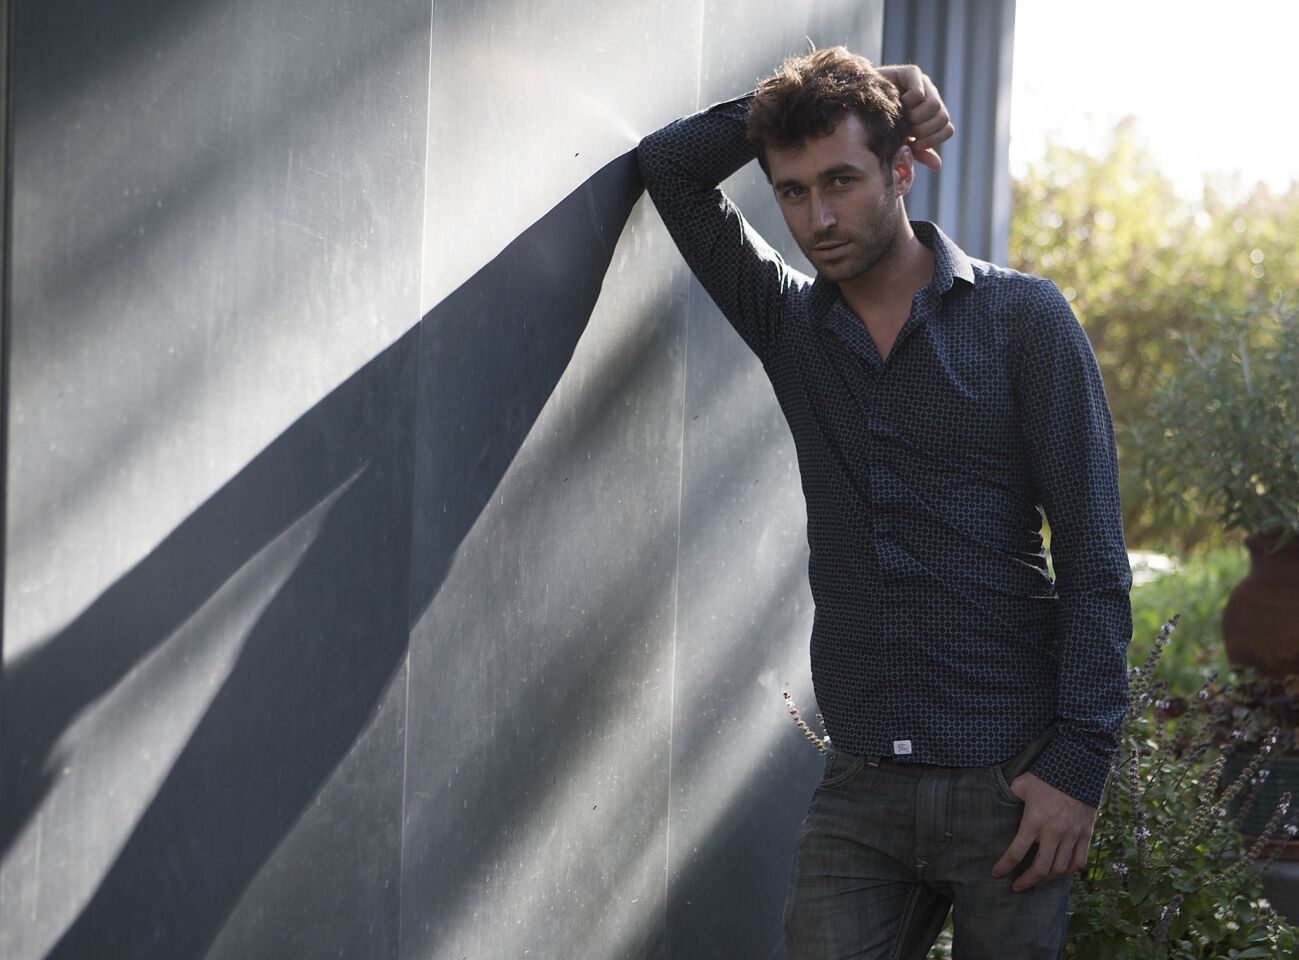 Porn star James Deen makes his dramatic feature debut in "The Canyons."